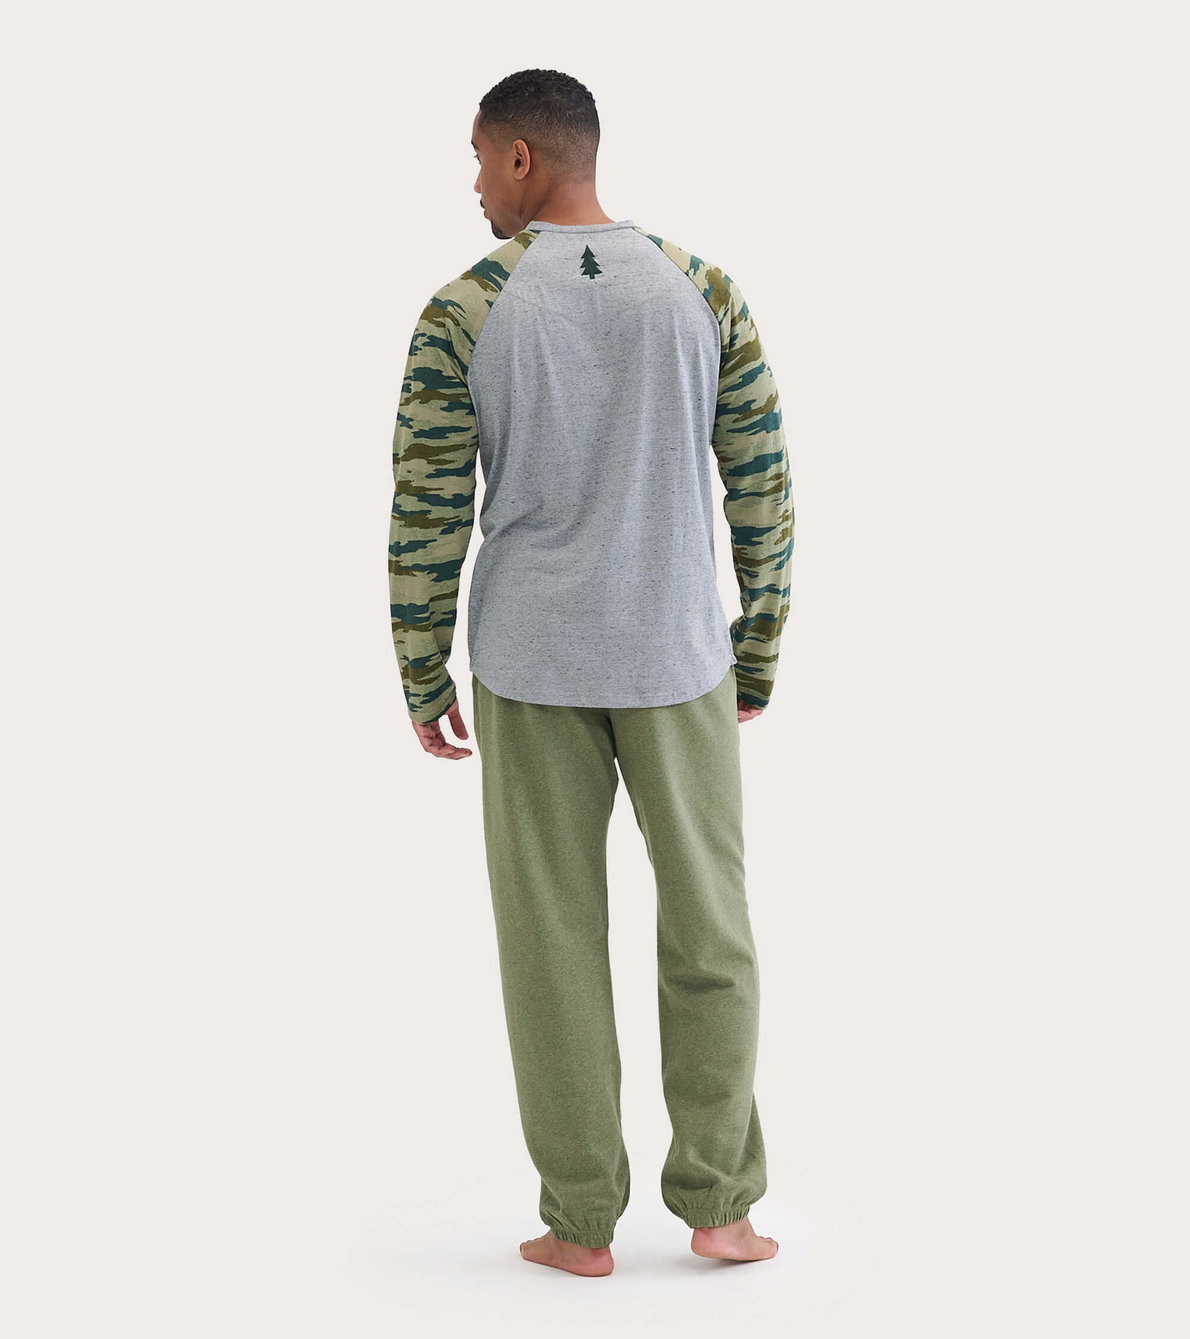 View larger image of Forest Green Moose Men's Heritage Joggers